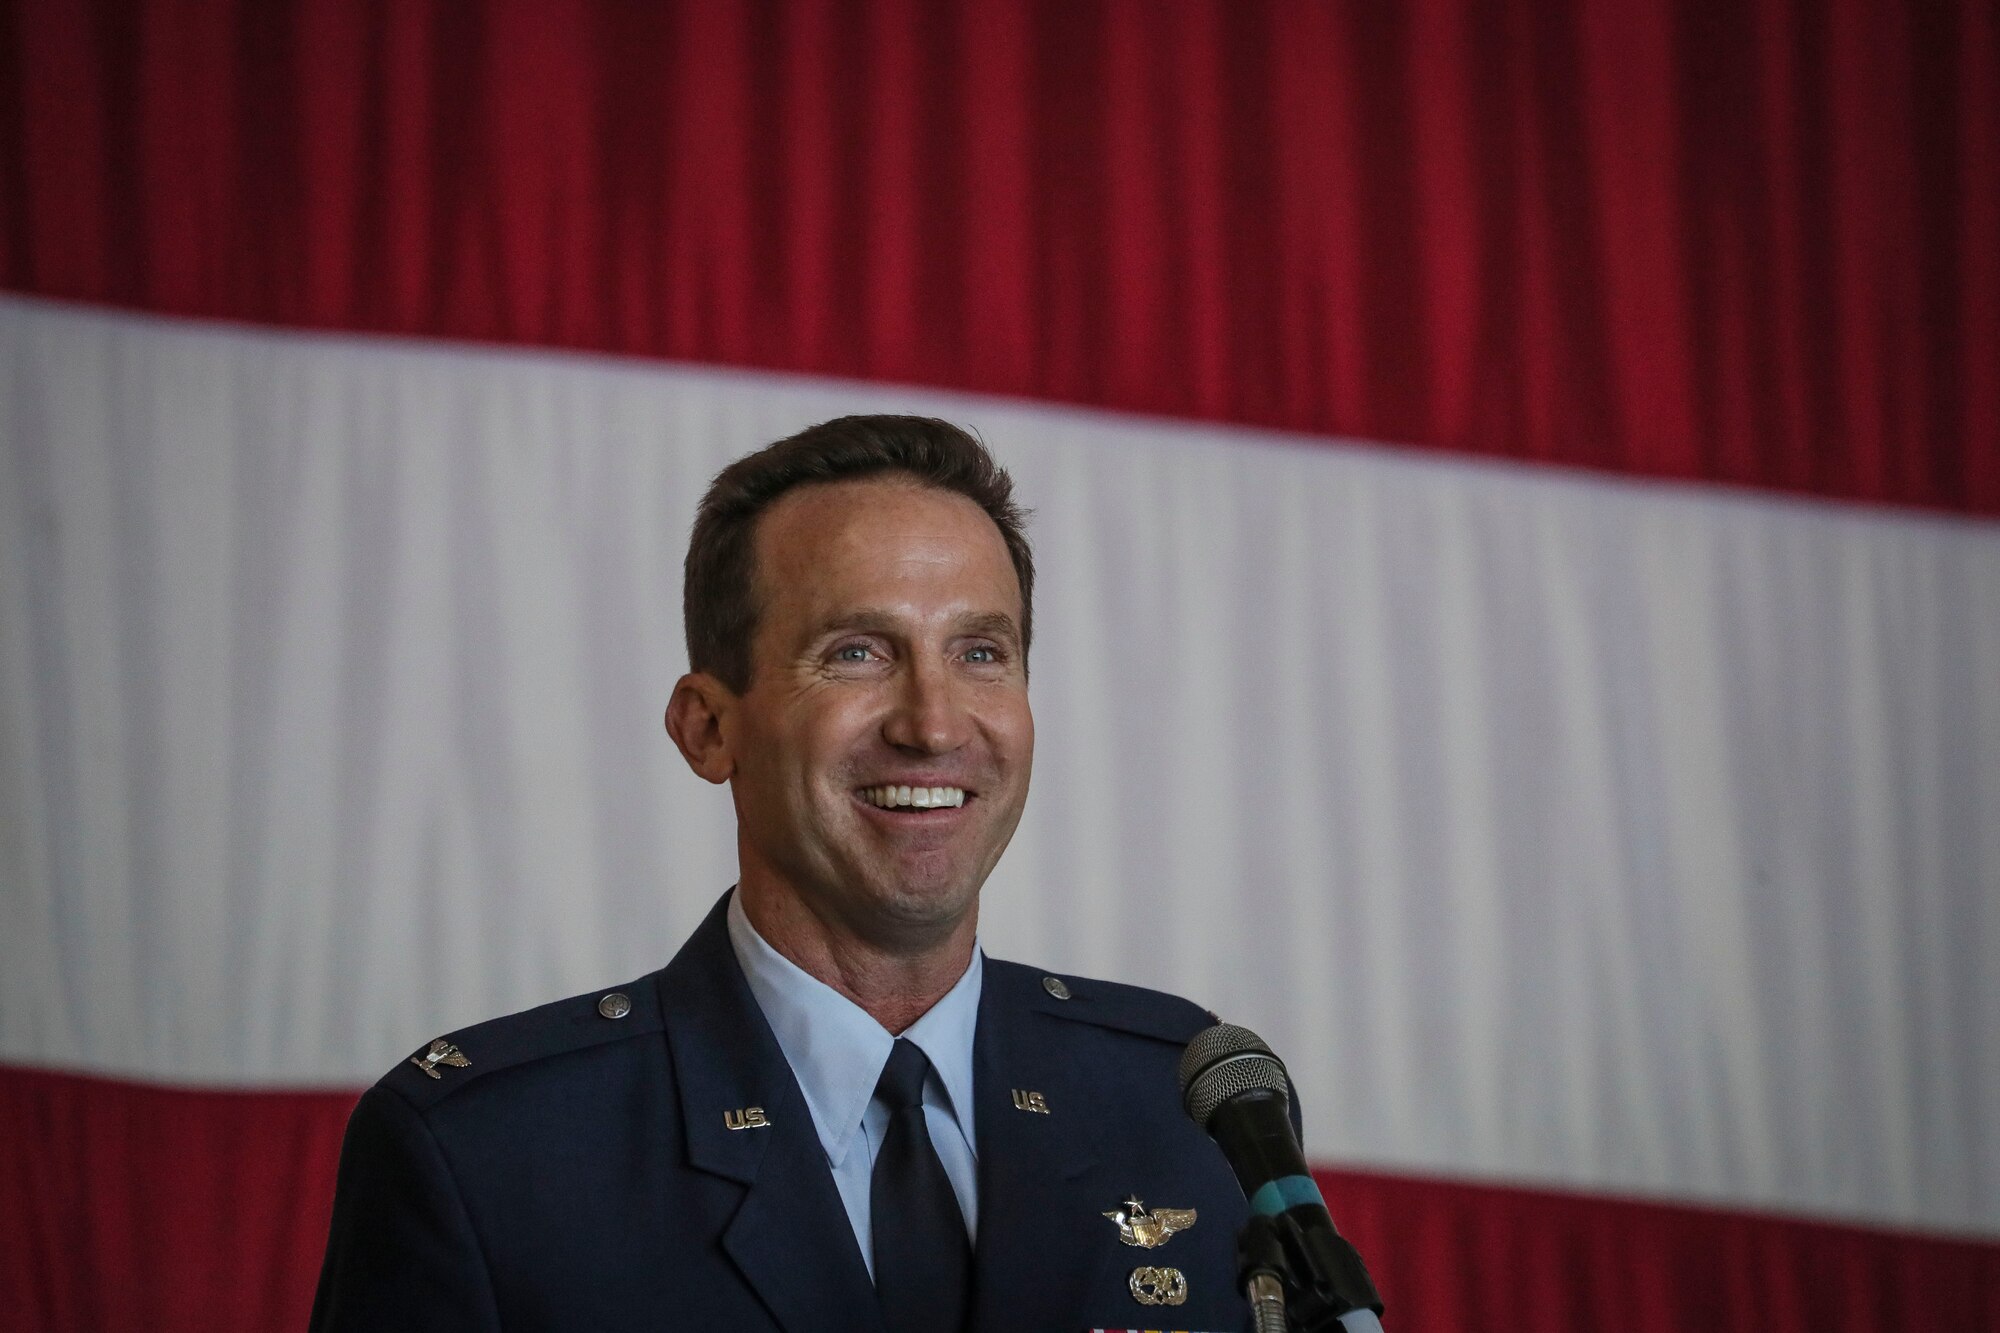 Col. John M. Cosgrove, commander of the New Jersey Air National Guard's 108th Wing, speaks during his change of command ceremony on Joint Base McGuire-Dix-Lakehurst, N.J., Nov. 4, 2018.